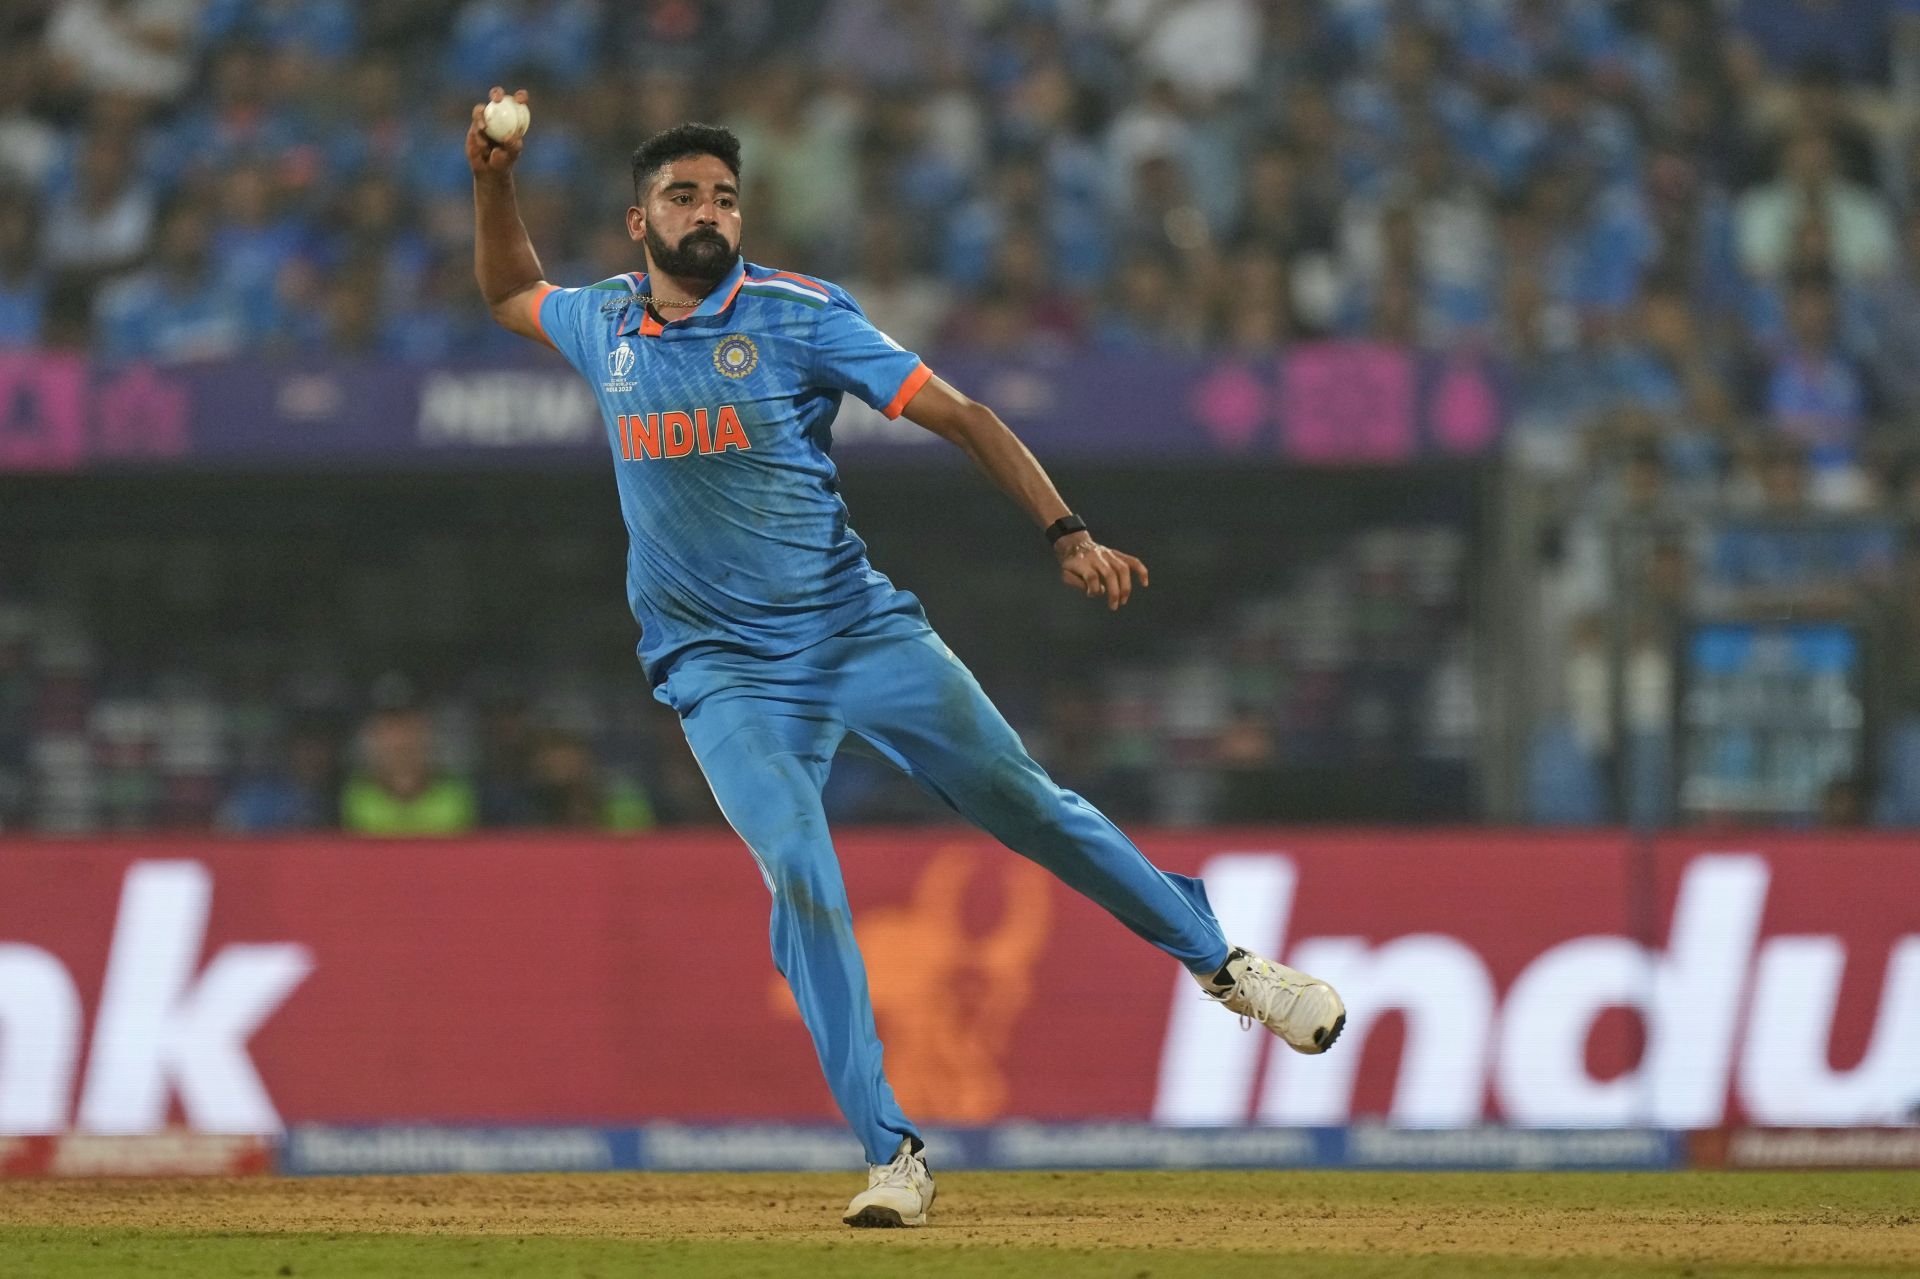 Mohammed Siraj was terribly expensive against New Zealand